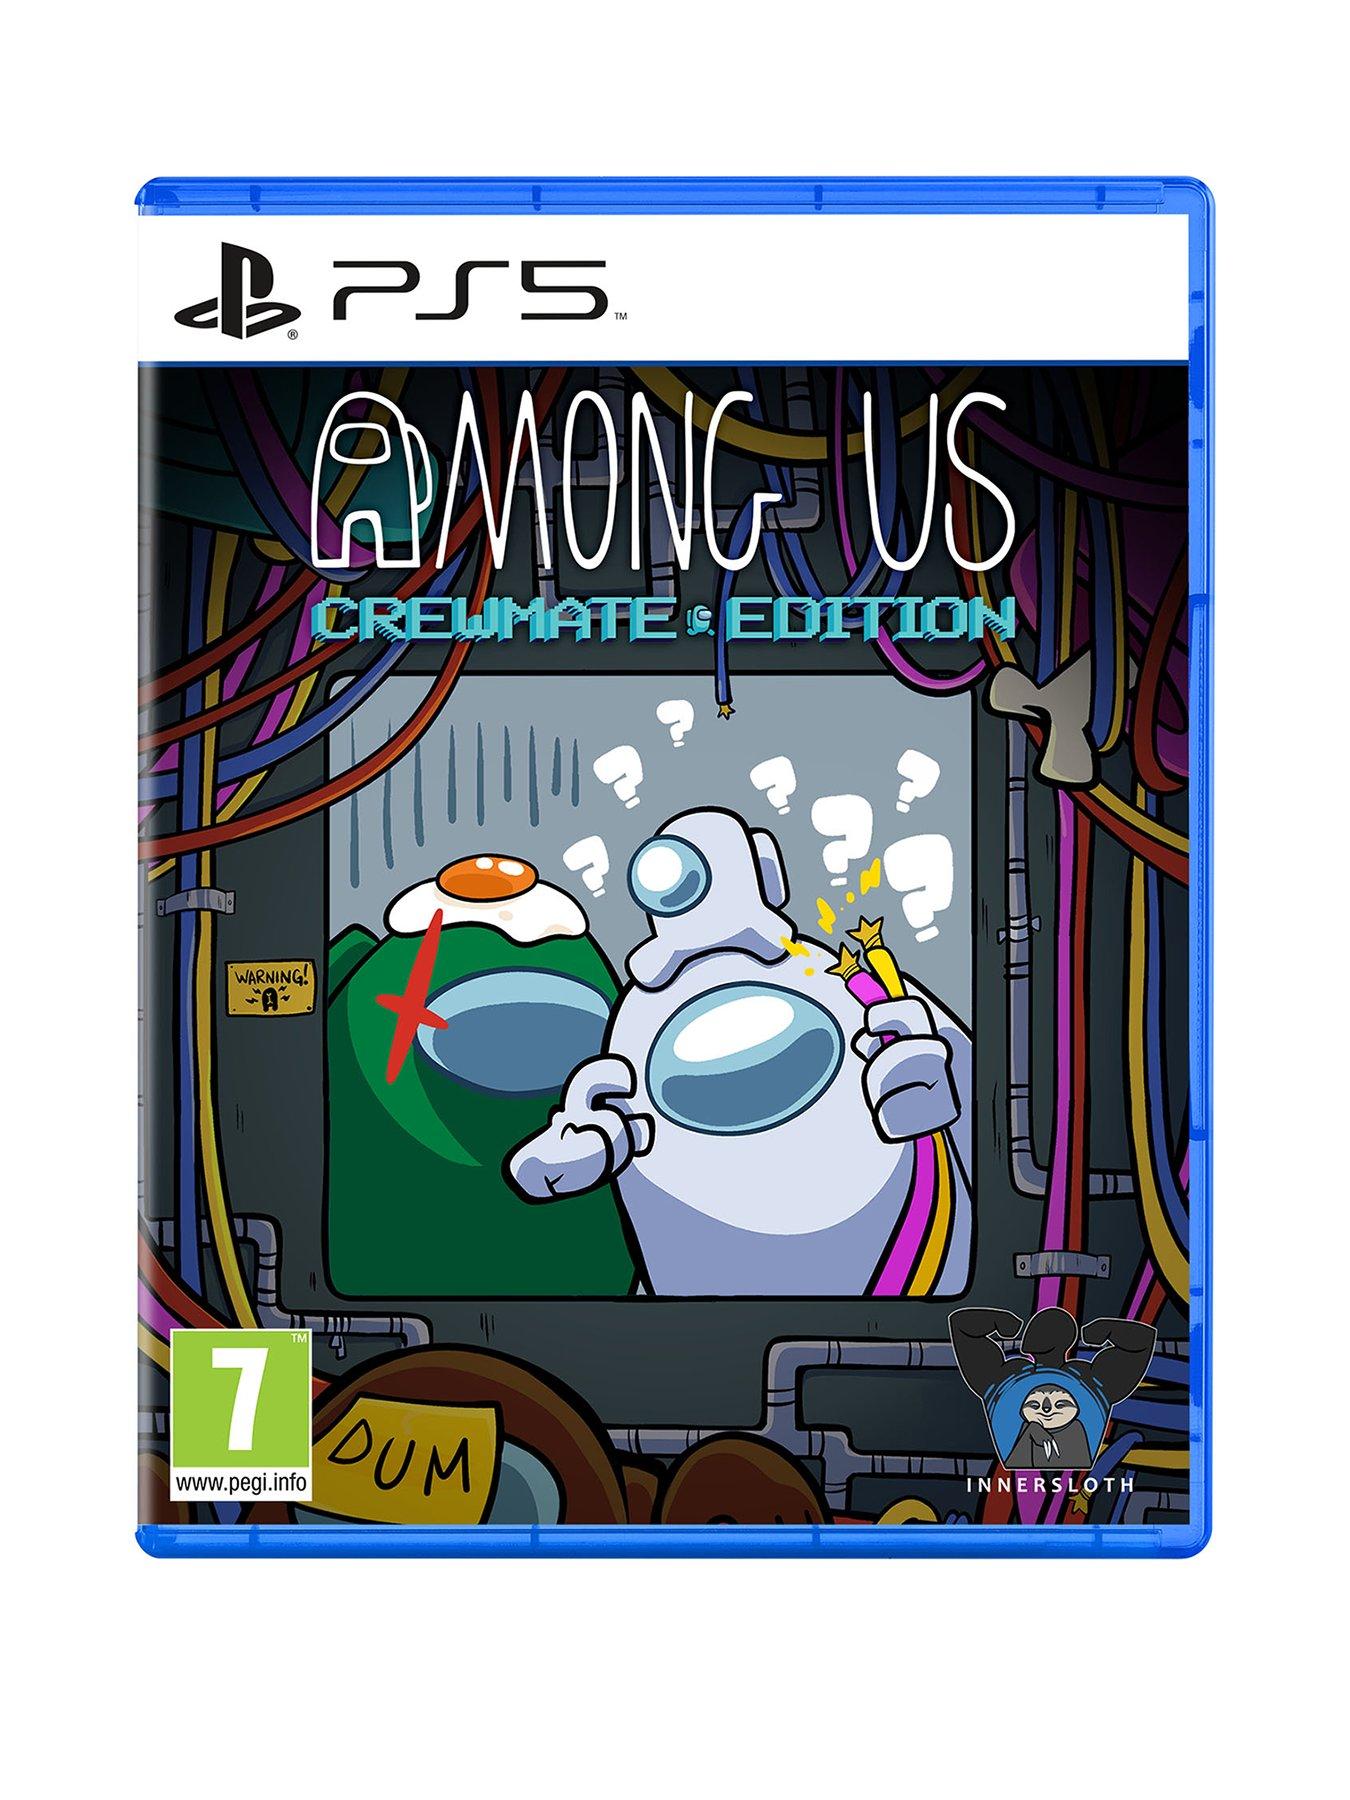 Among Us: Crewmate Edition - PS5 - Played 1 Time Playstation 5 Roblox